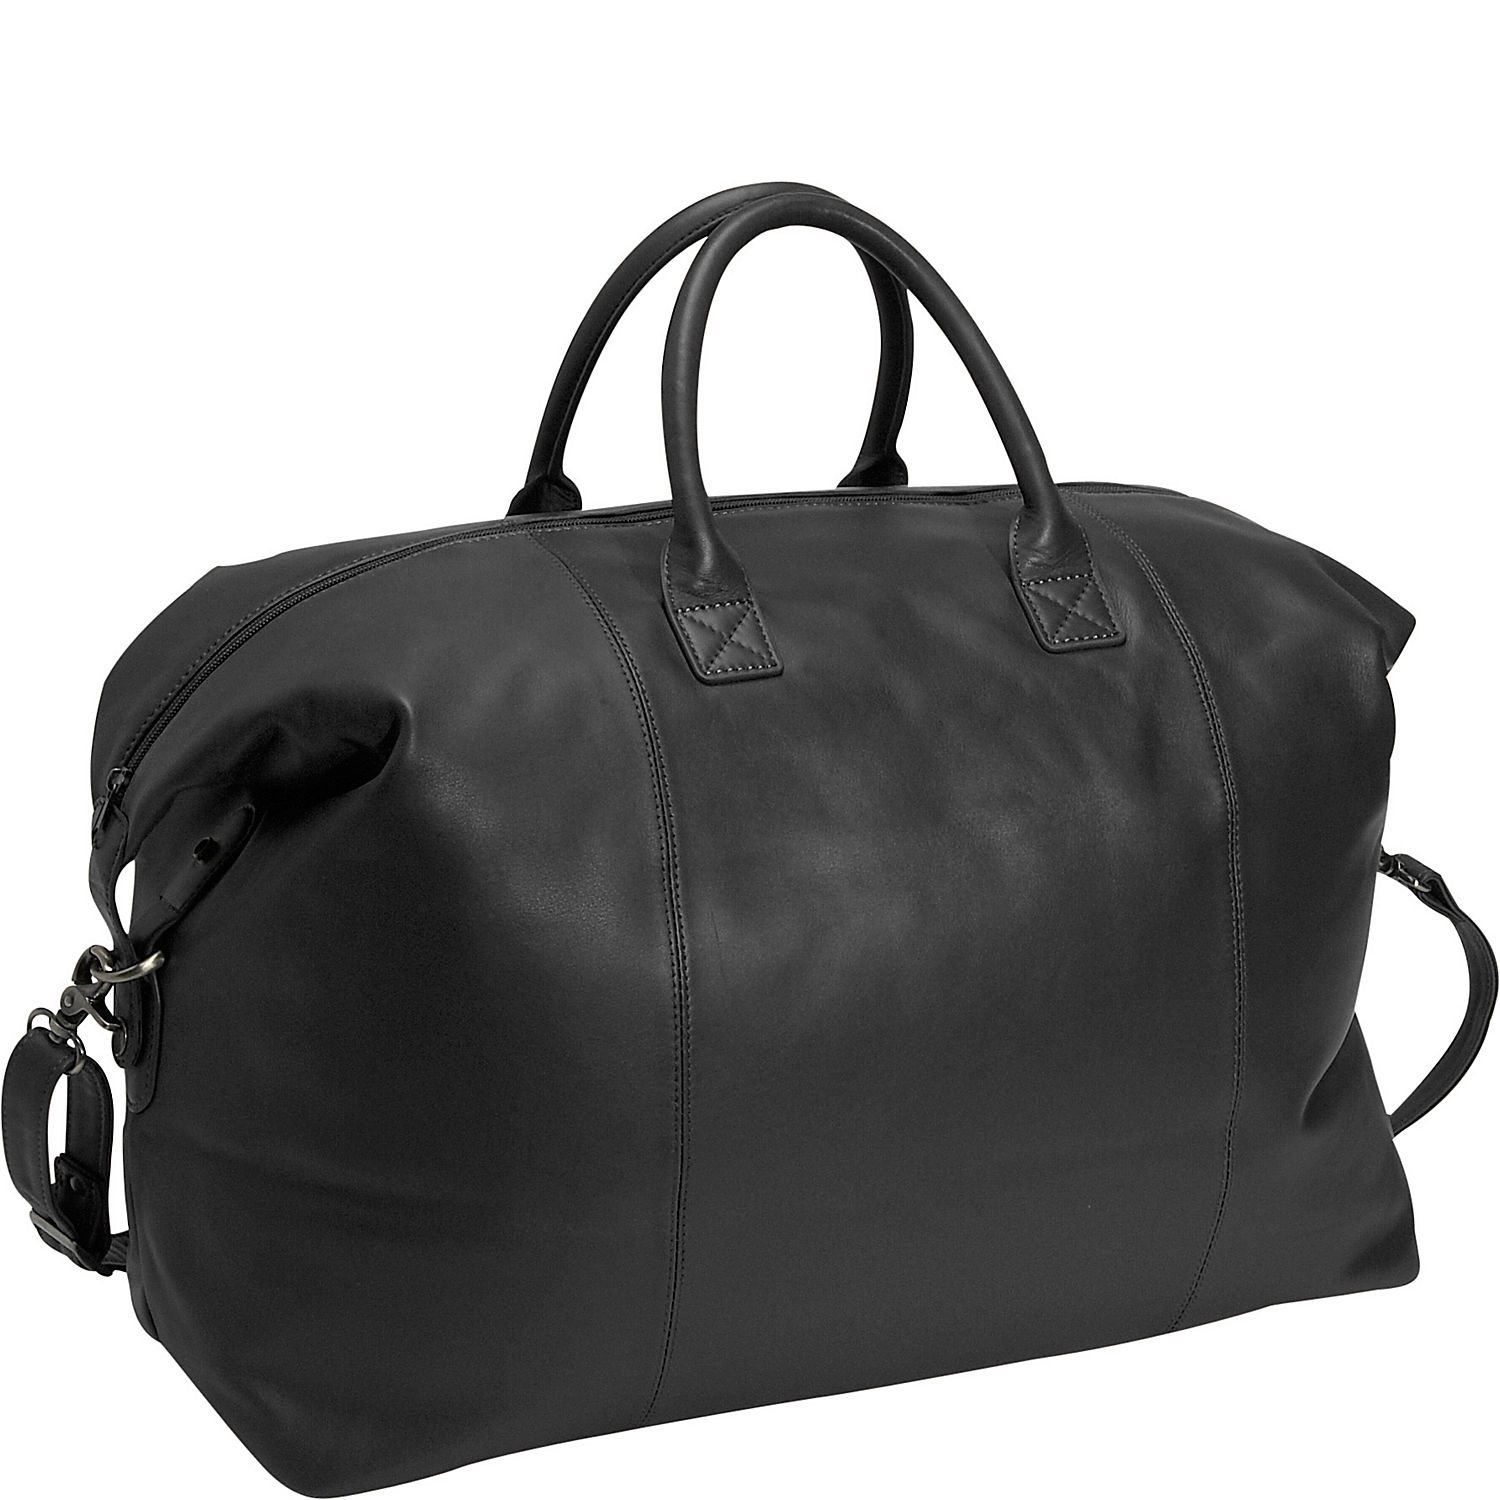 Royce Leather Royce Leather Travel Duffel Overnight Bag in Genuine ...